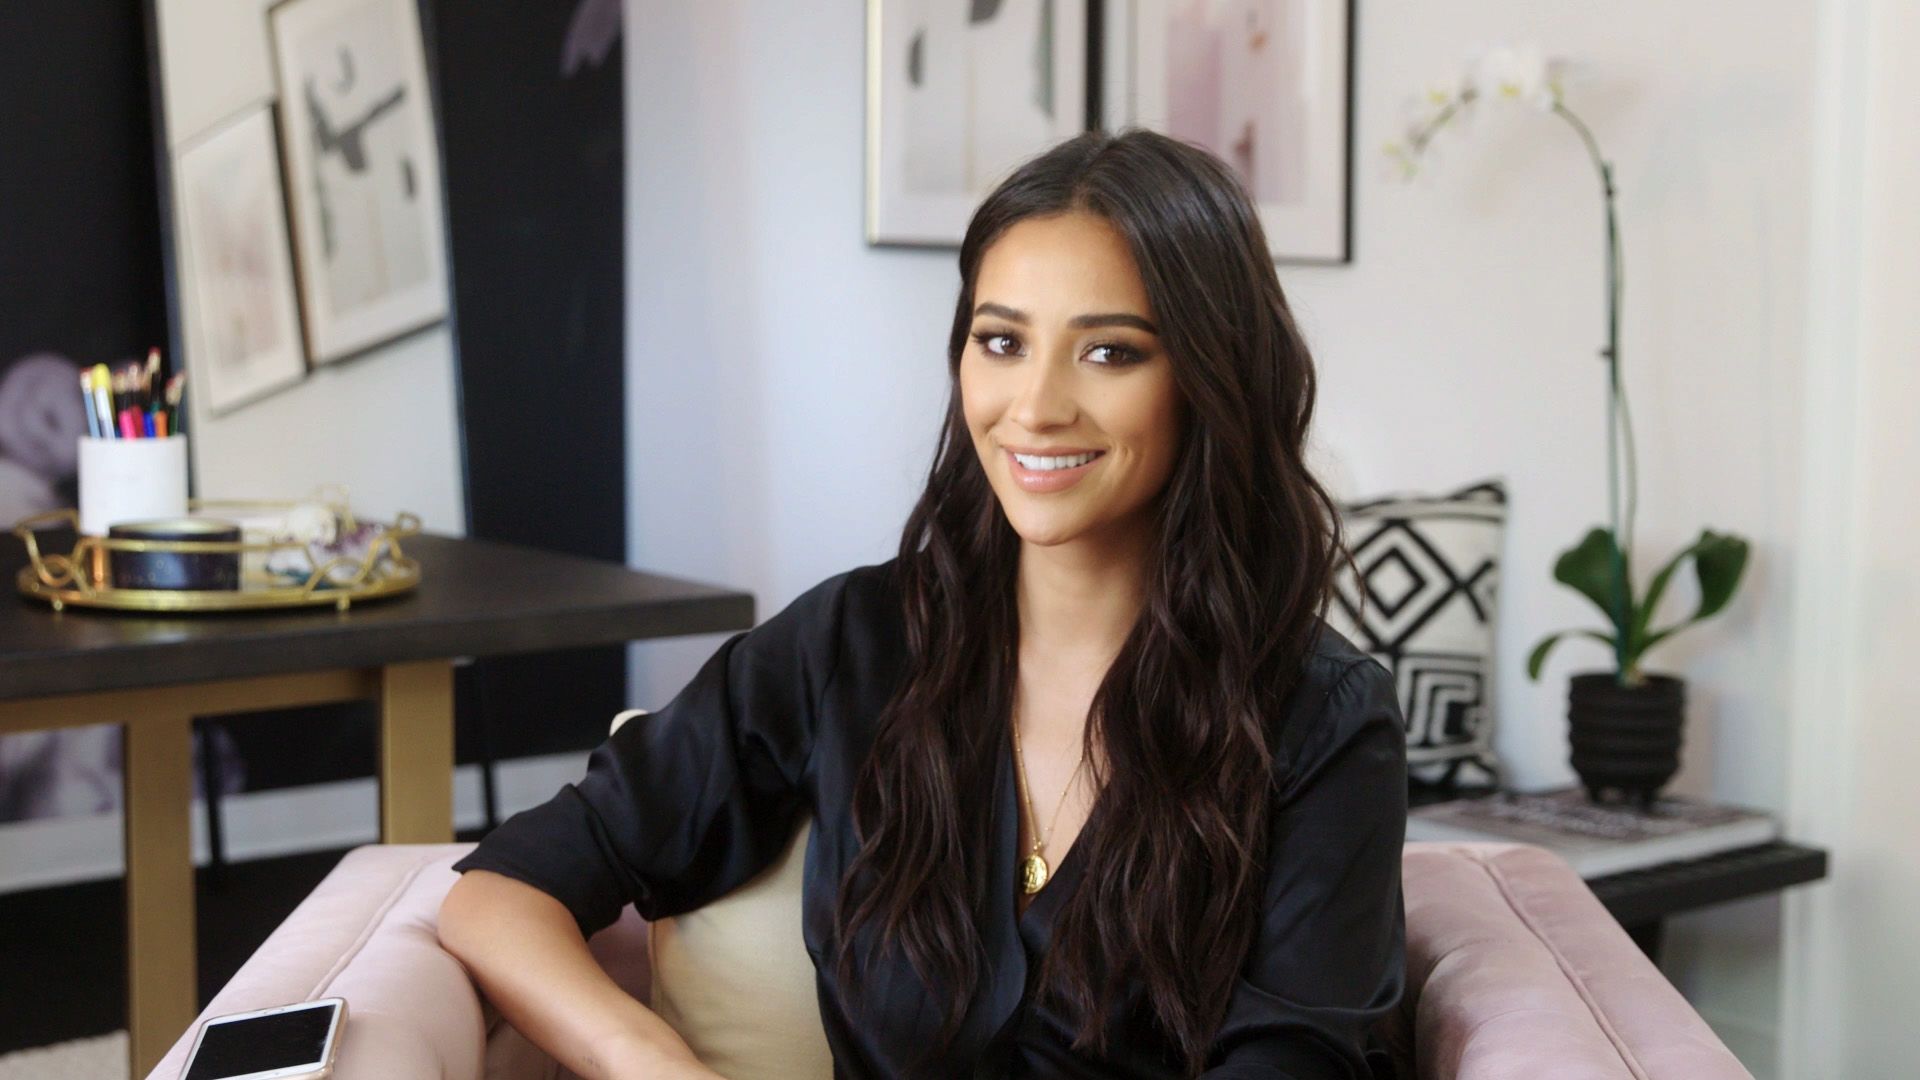 Shay Mitchell 2019 Wallpapers